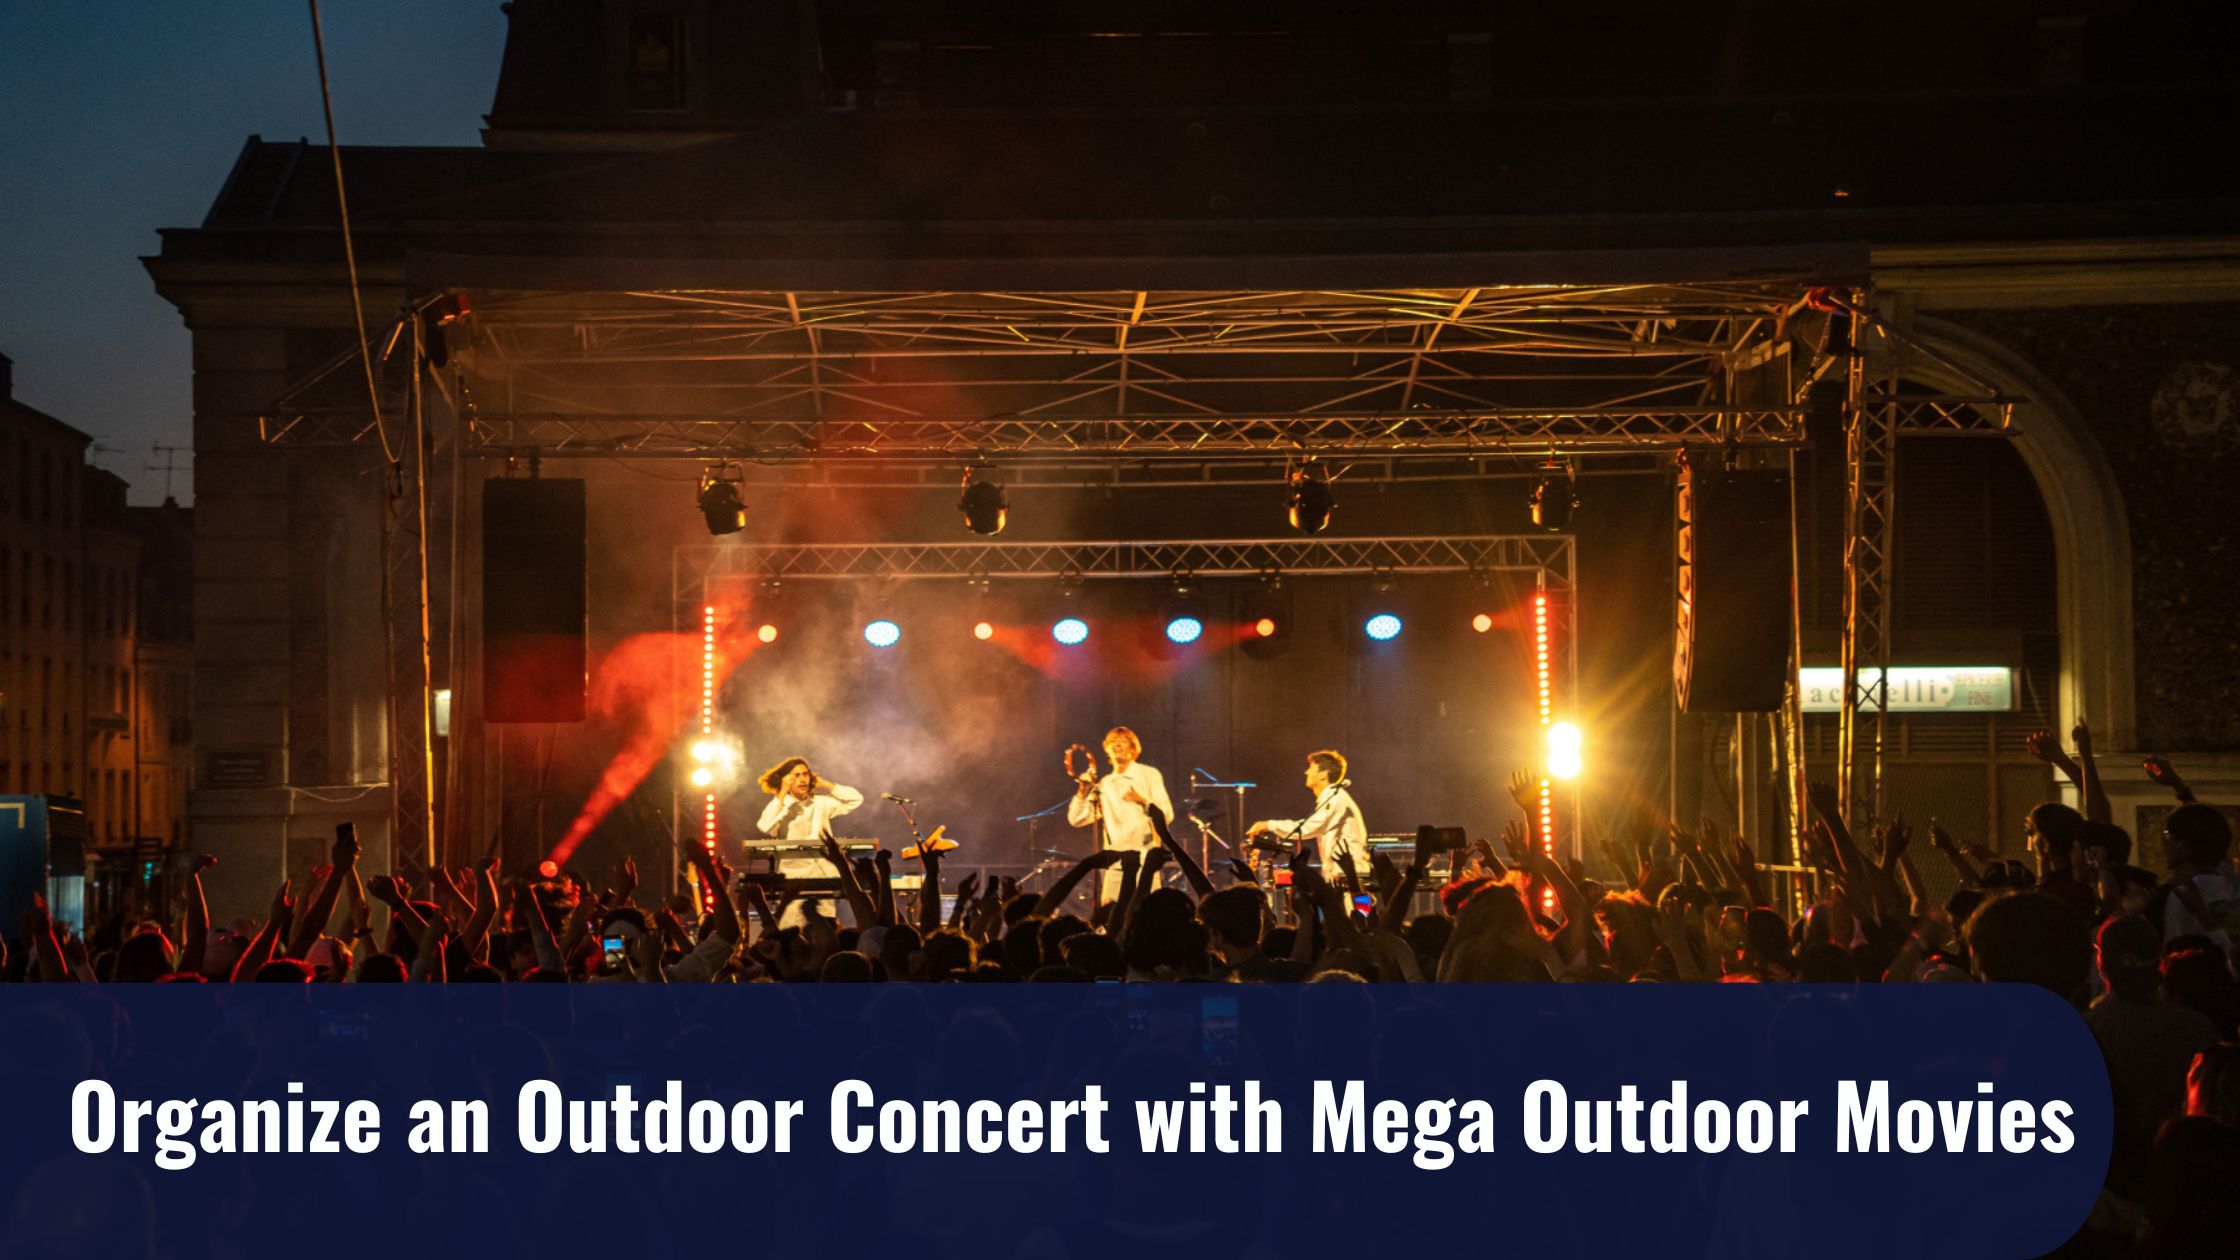 How to Organize an Outdoor Concert with Mega Outdoor Movies: 10 Simple Steps